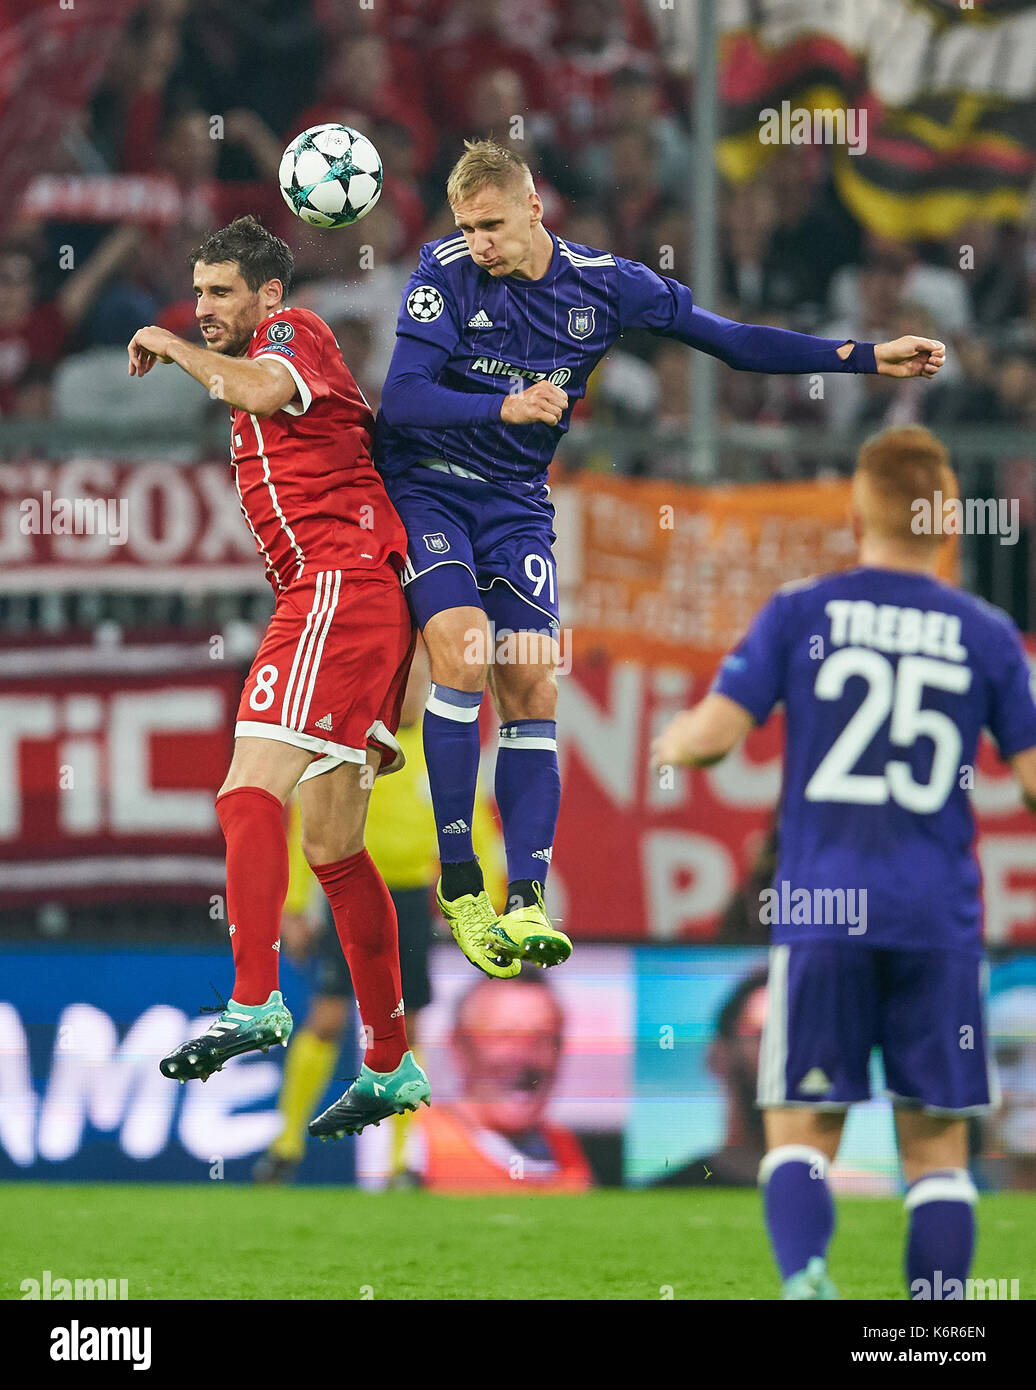 Munich, Germany. 12th Sep, 2017. Javi MARTINEZ, FCB 8 compete for the ball against Lukasz TEODORCZYK, RSC ANDERLECHT 91 UEFA Champions League group stage, FC BAVARIA MUNICH - RSC ANDERLECHT 3-0 in Munich, Sept 12, 2017 Credit: Peter Schatz/Alamy Live News Stock Photo